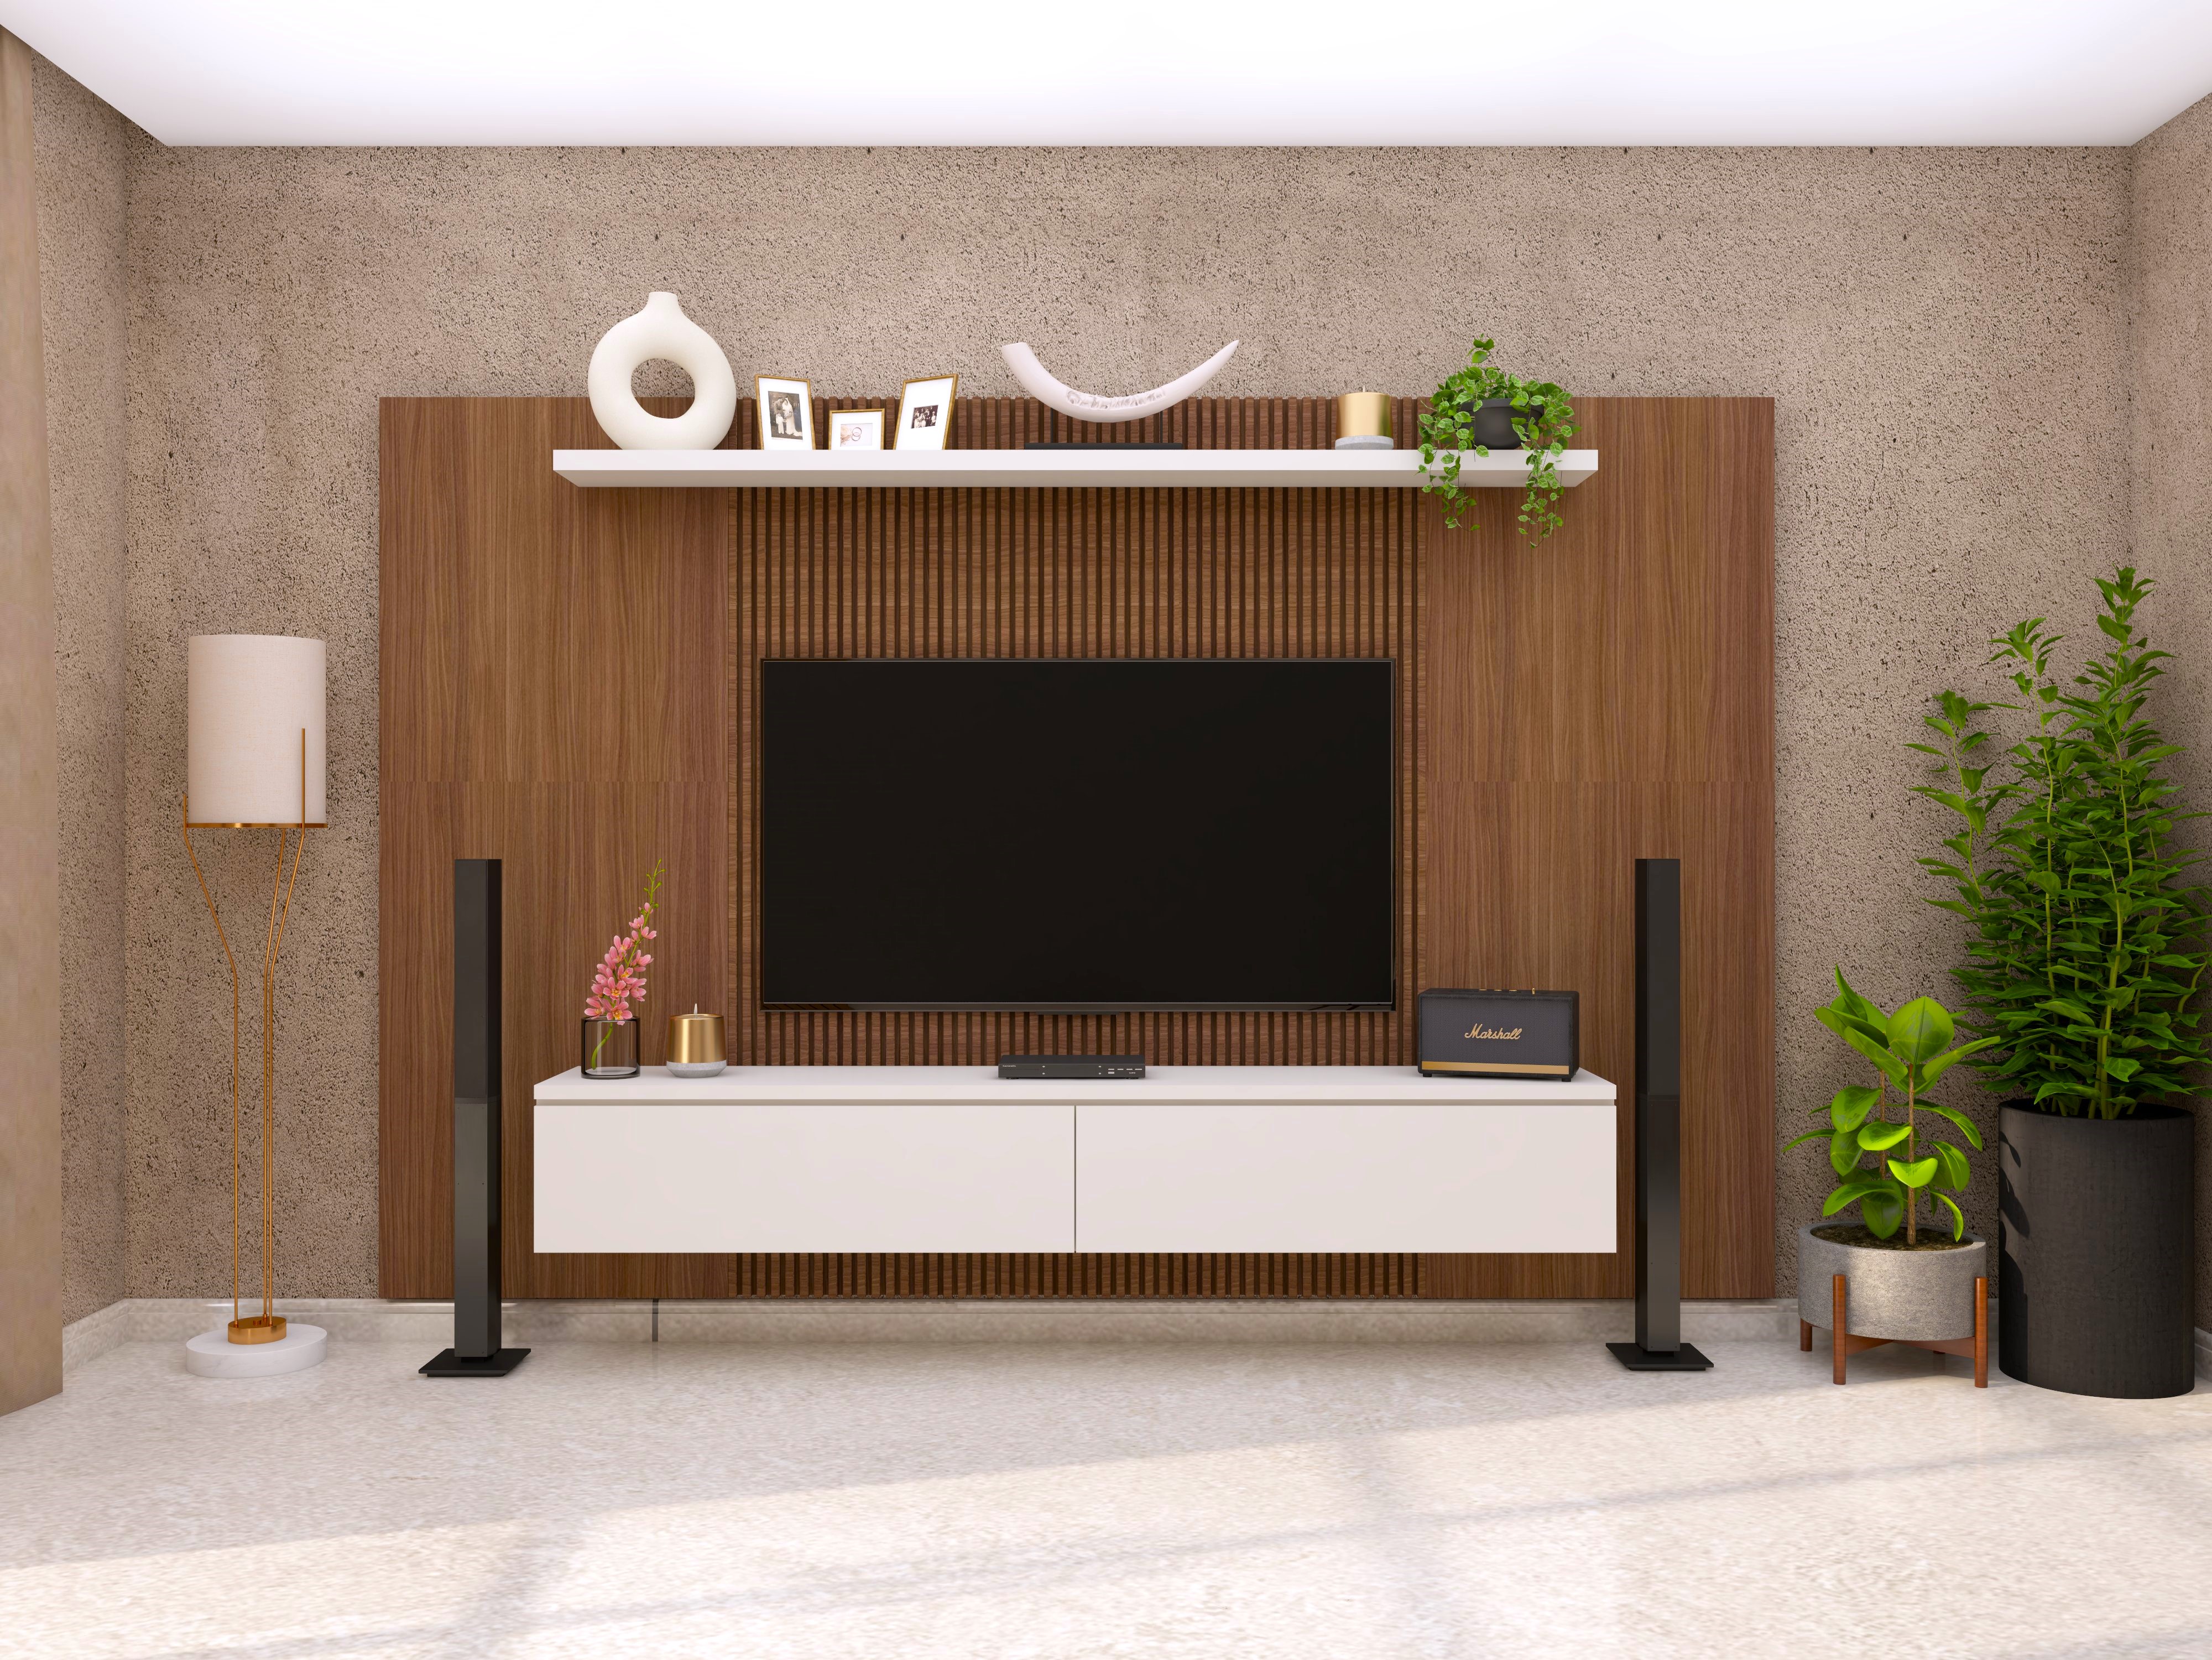 Simple TV unit with wooden back panel and white wall mounted drawers - Beautiful Homes